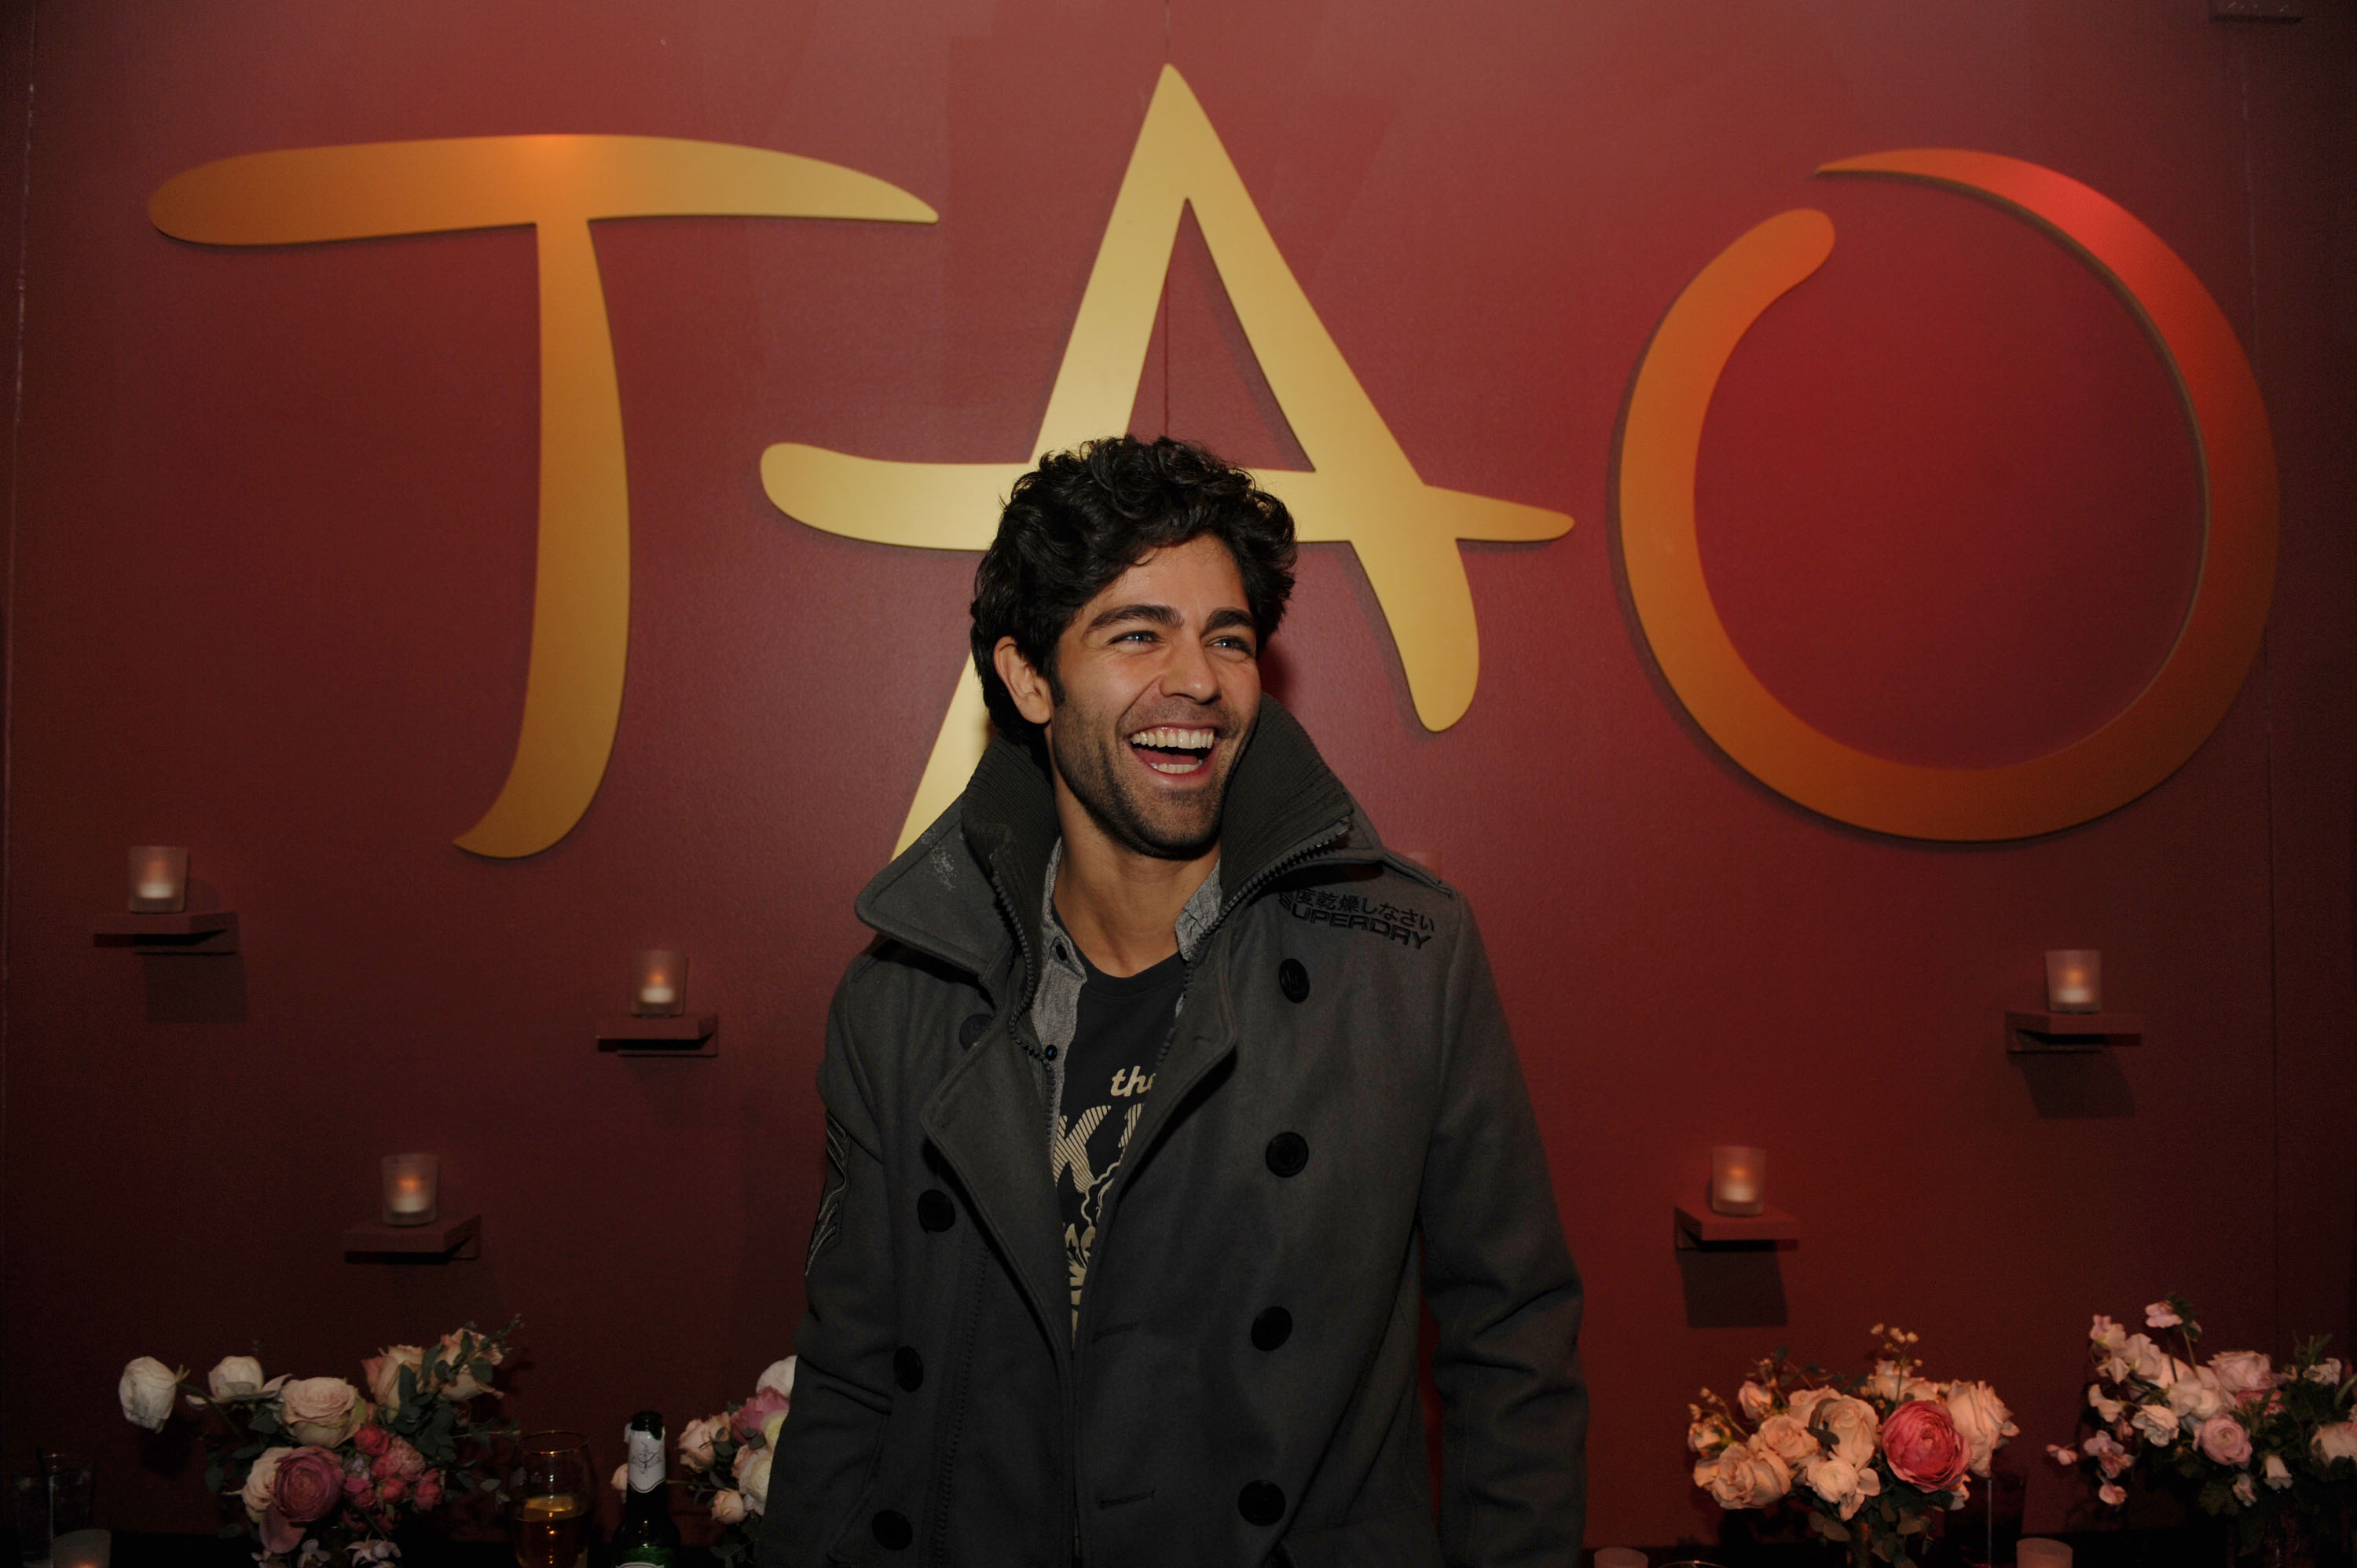 Adrian Grenier - "Le Bare" After Party at Tao at Village at The Lift with Moët & Chandon Nectar Impérial Rosé & Stella Artois